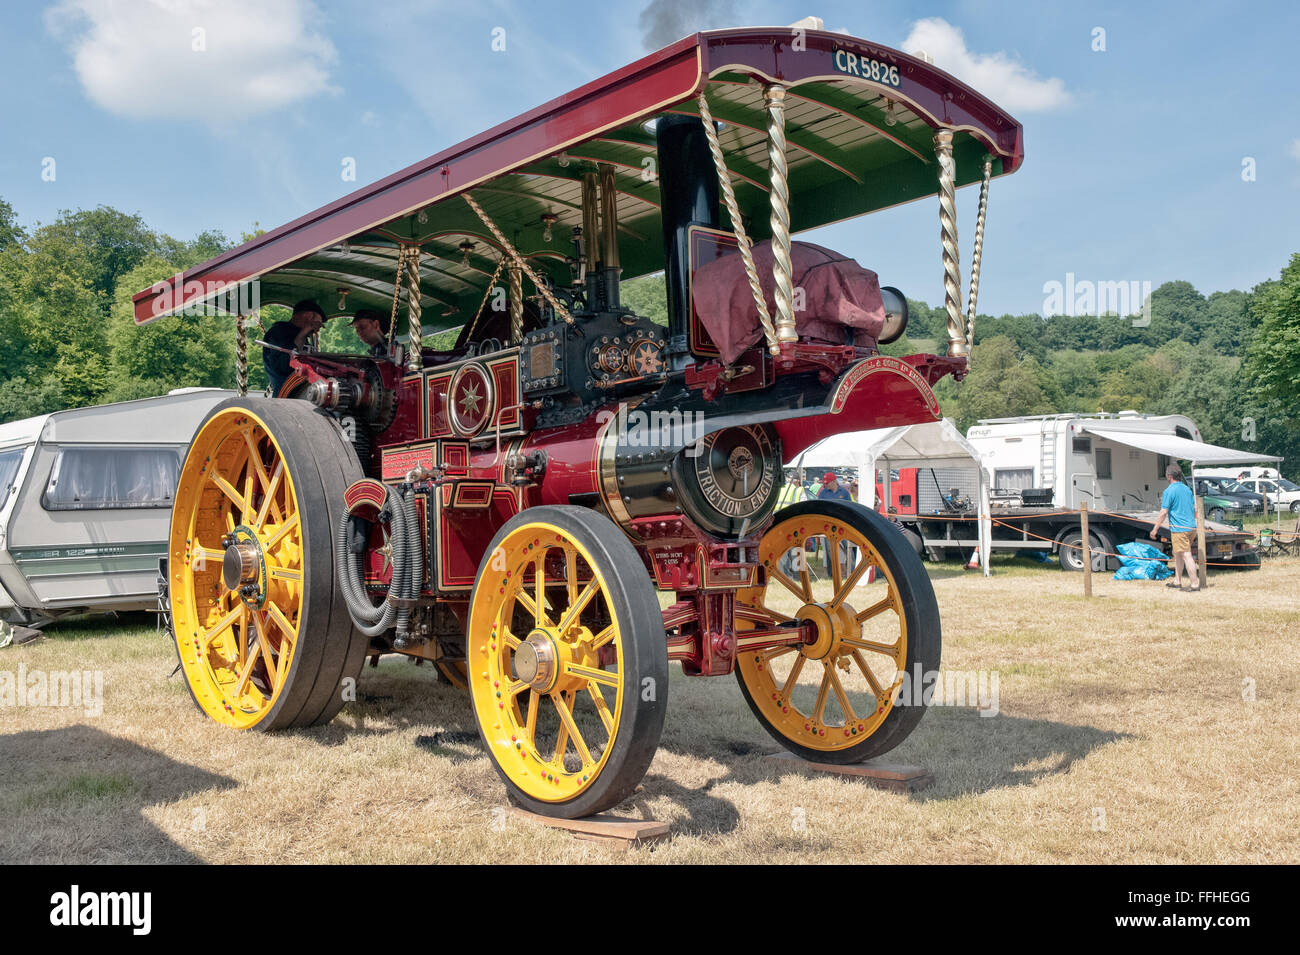 The Historic,  Philadelphia steam traction, show engine operating on a sunny day at an event in Wiltshire, UK Stock Photo